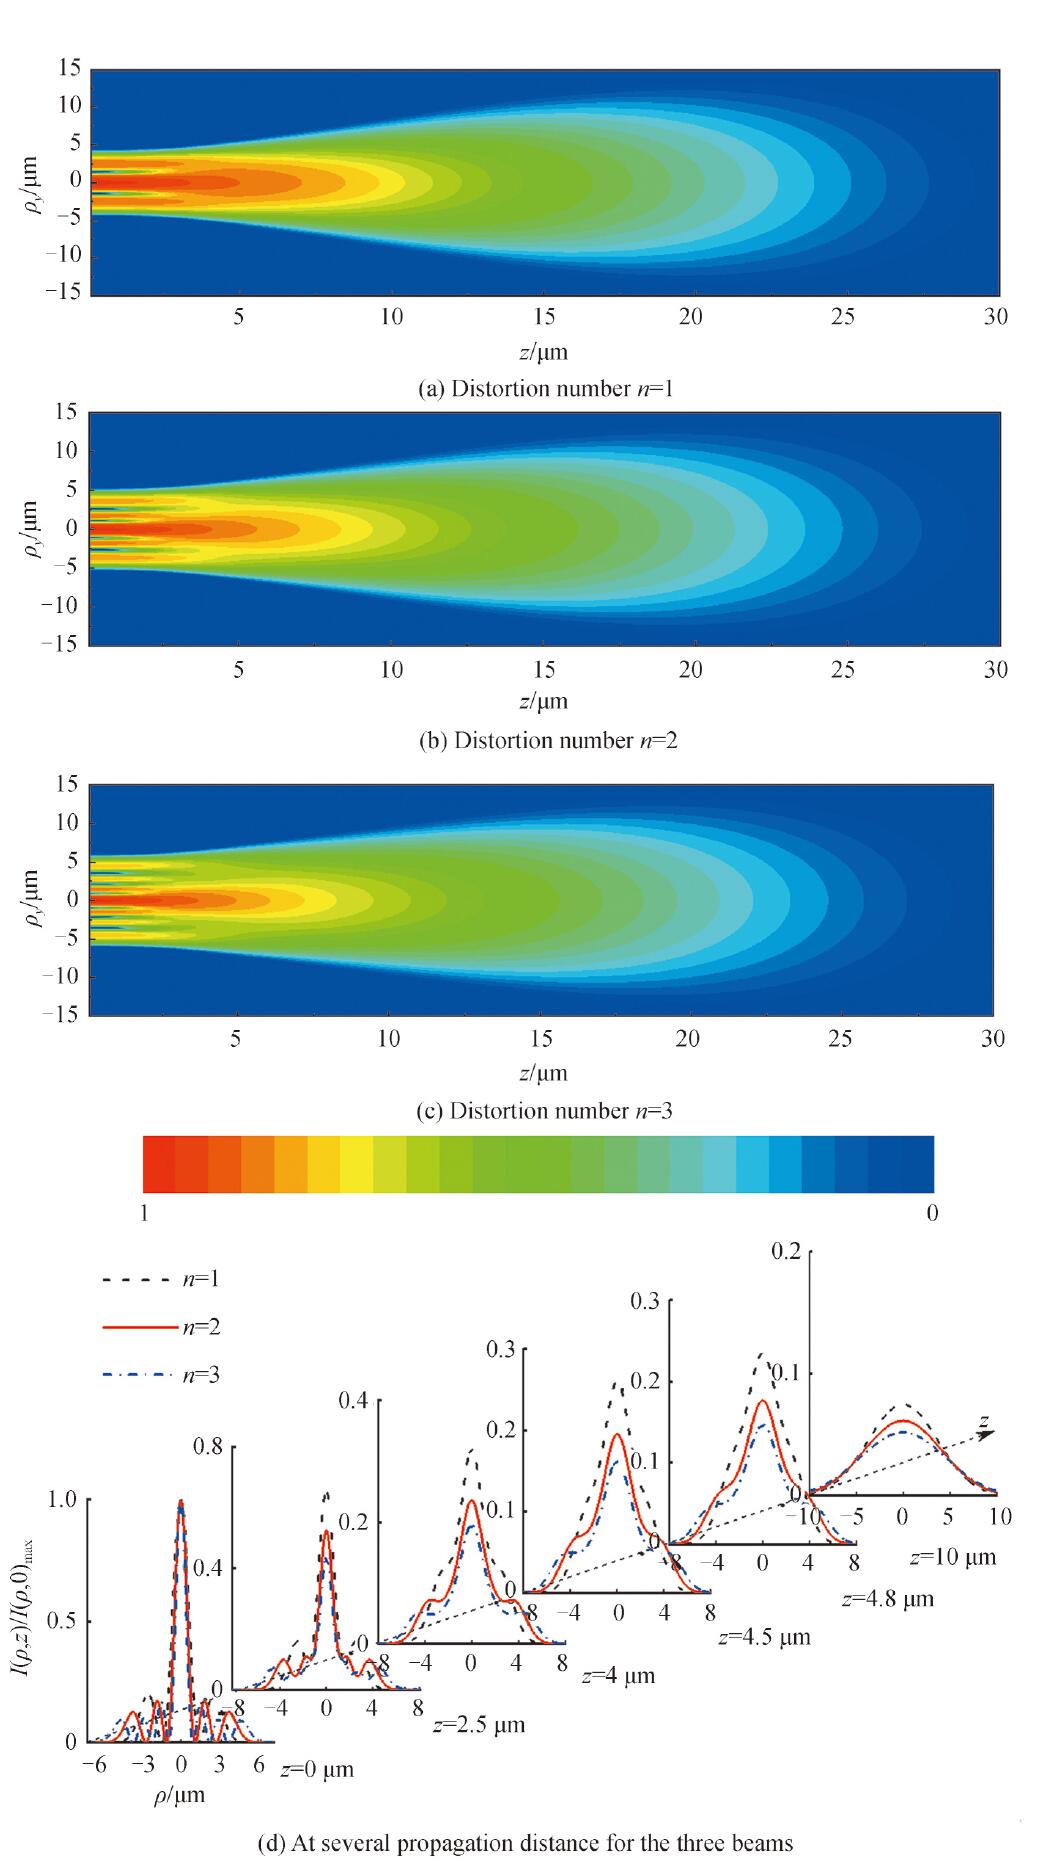 The intensity distribution of the partially coherent circle edge distortion beams with different distortion number n in the deep dermis of mouse tissue